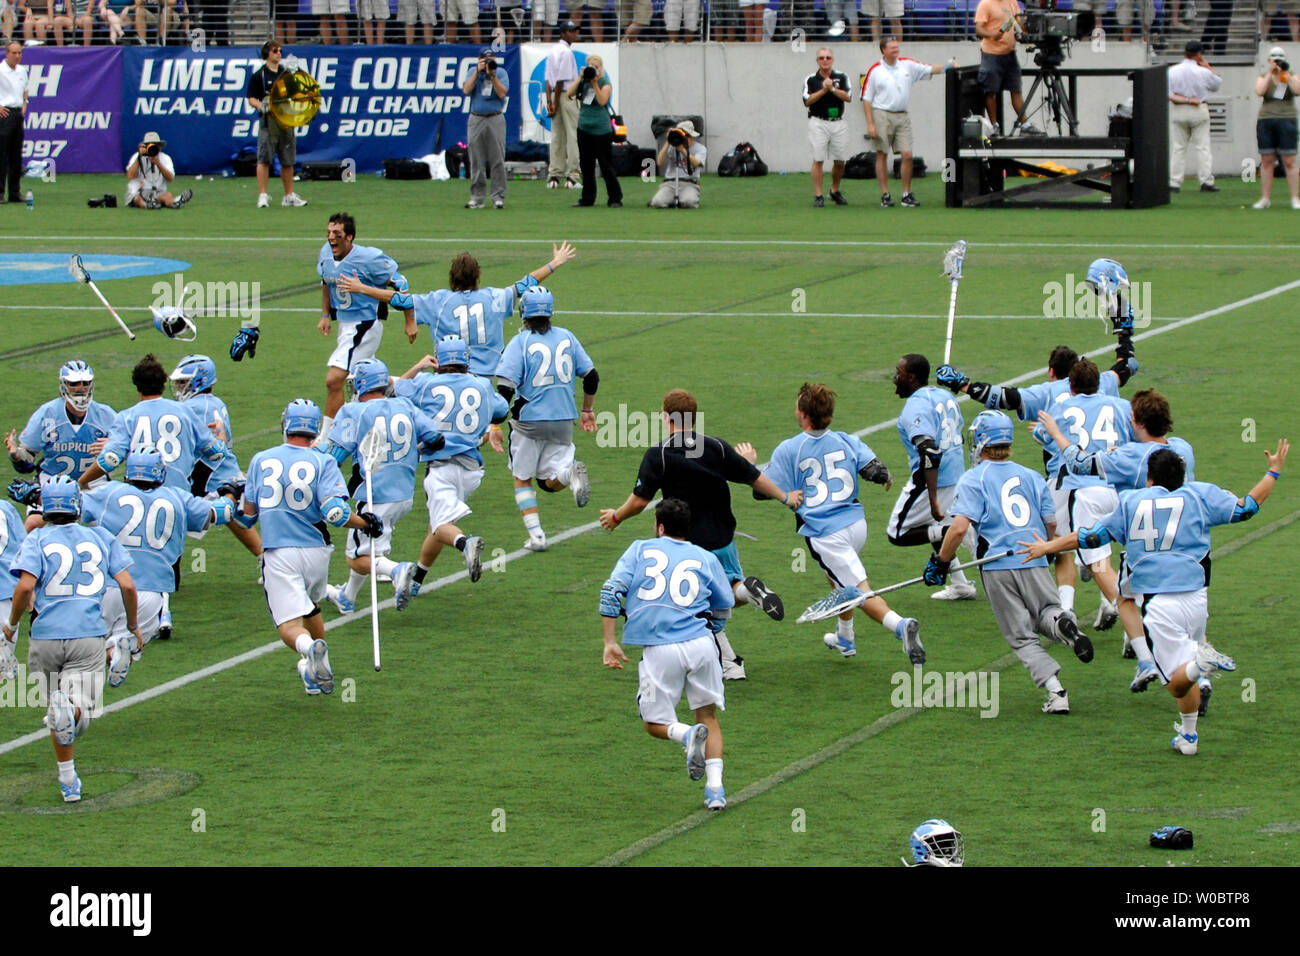 The Johns Hopkins University Blue Jays celebrate winning the NCAA Division I Lacrosse Championship at M&T Bank Stadium in Baltimore, Maryland on May 28, 2007.  Johns Hopkins defeated Duke to win the NCAA lacrosse championship 12-11.  (UPI Photo/ Mark Goldman) Stock Photo